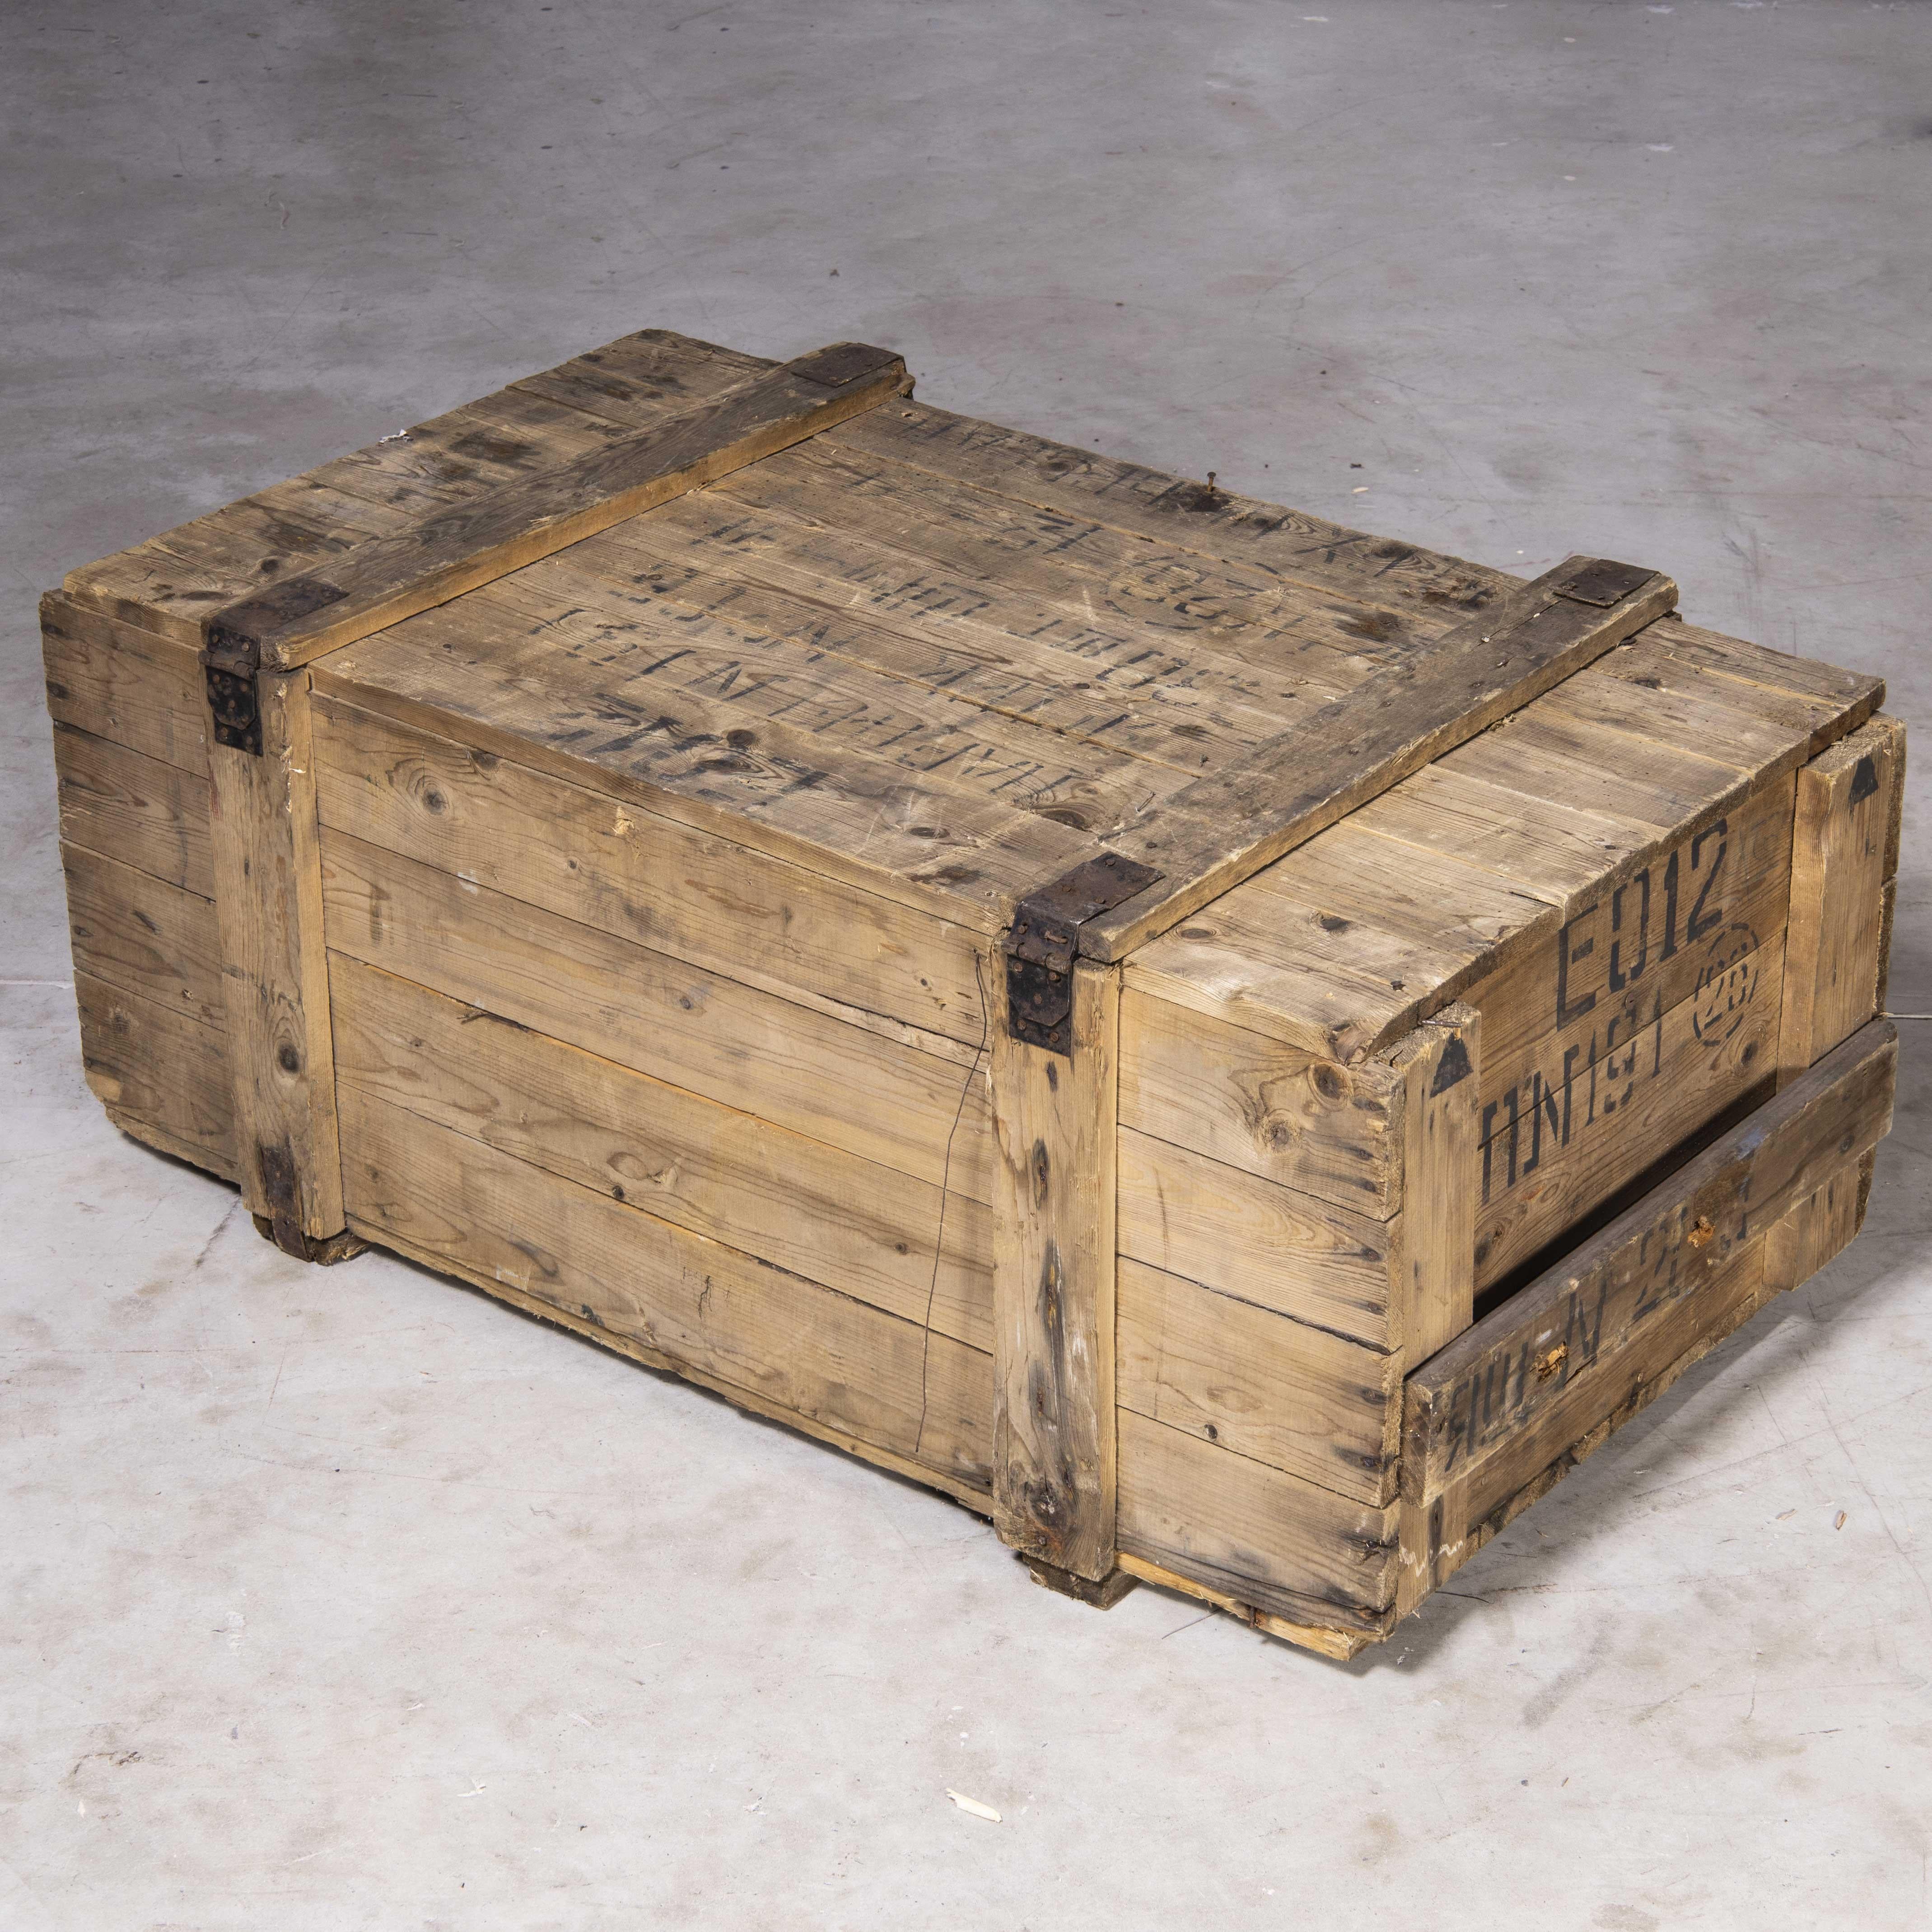 1950’s Russian military storage crate (model 255.3)
1950’s Russian military storage crate (model 255.3). Large heavy duty pine crate sourced from military dead stock. We get a lot of demand for this sort of large crate useful for general storage,